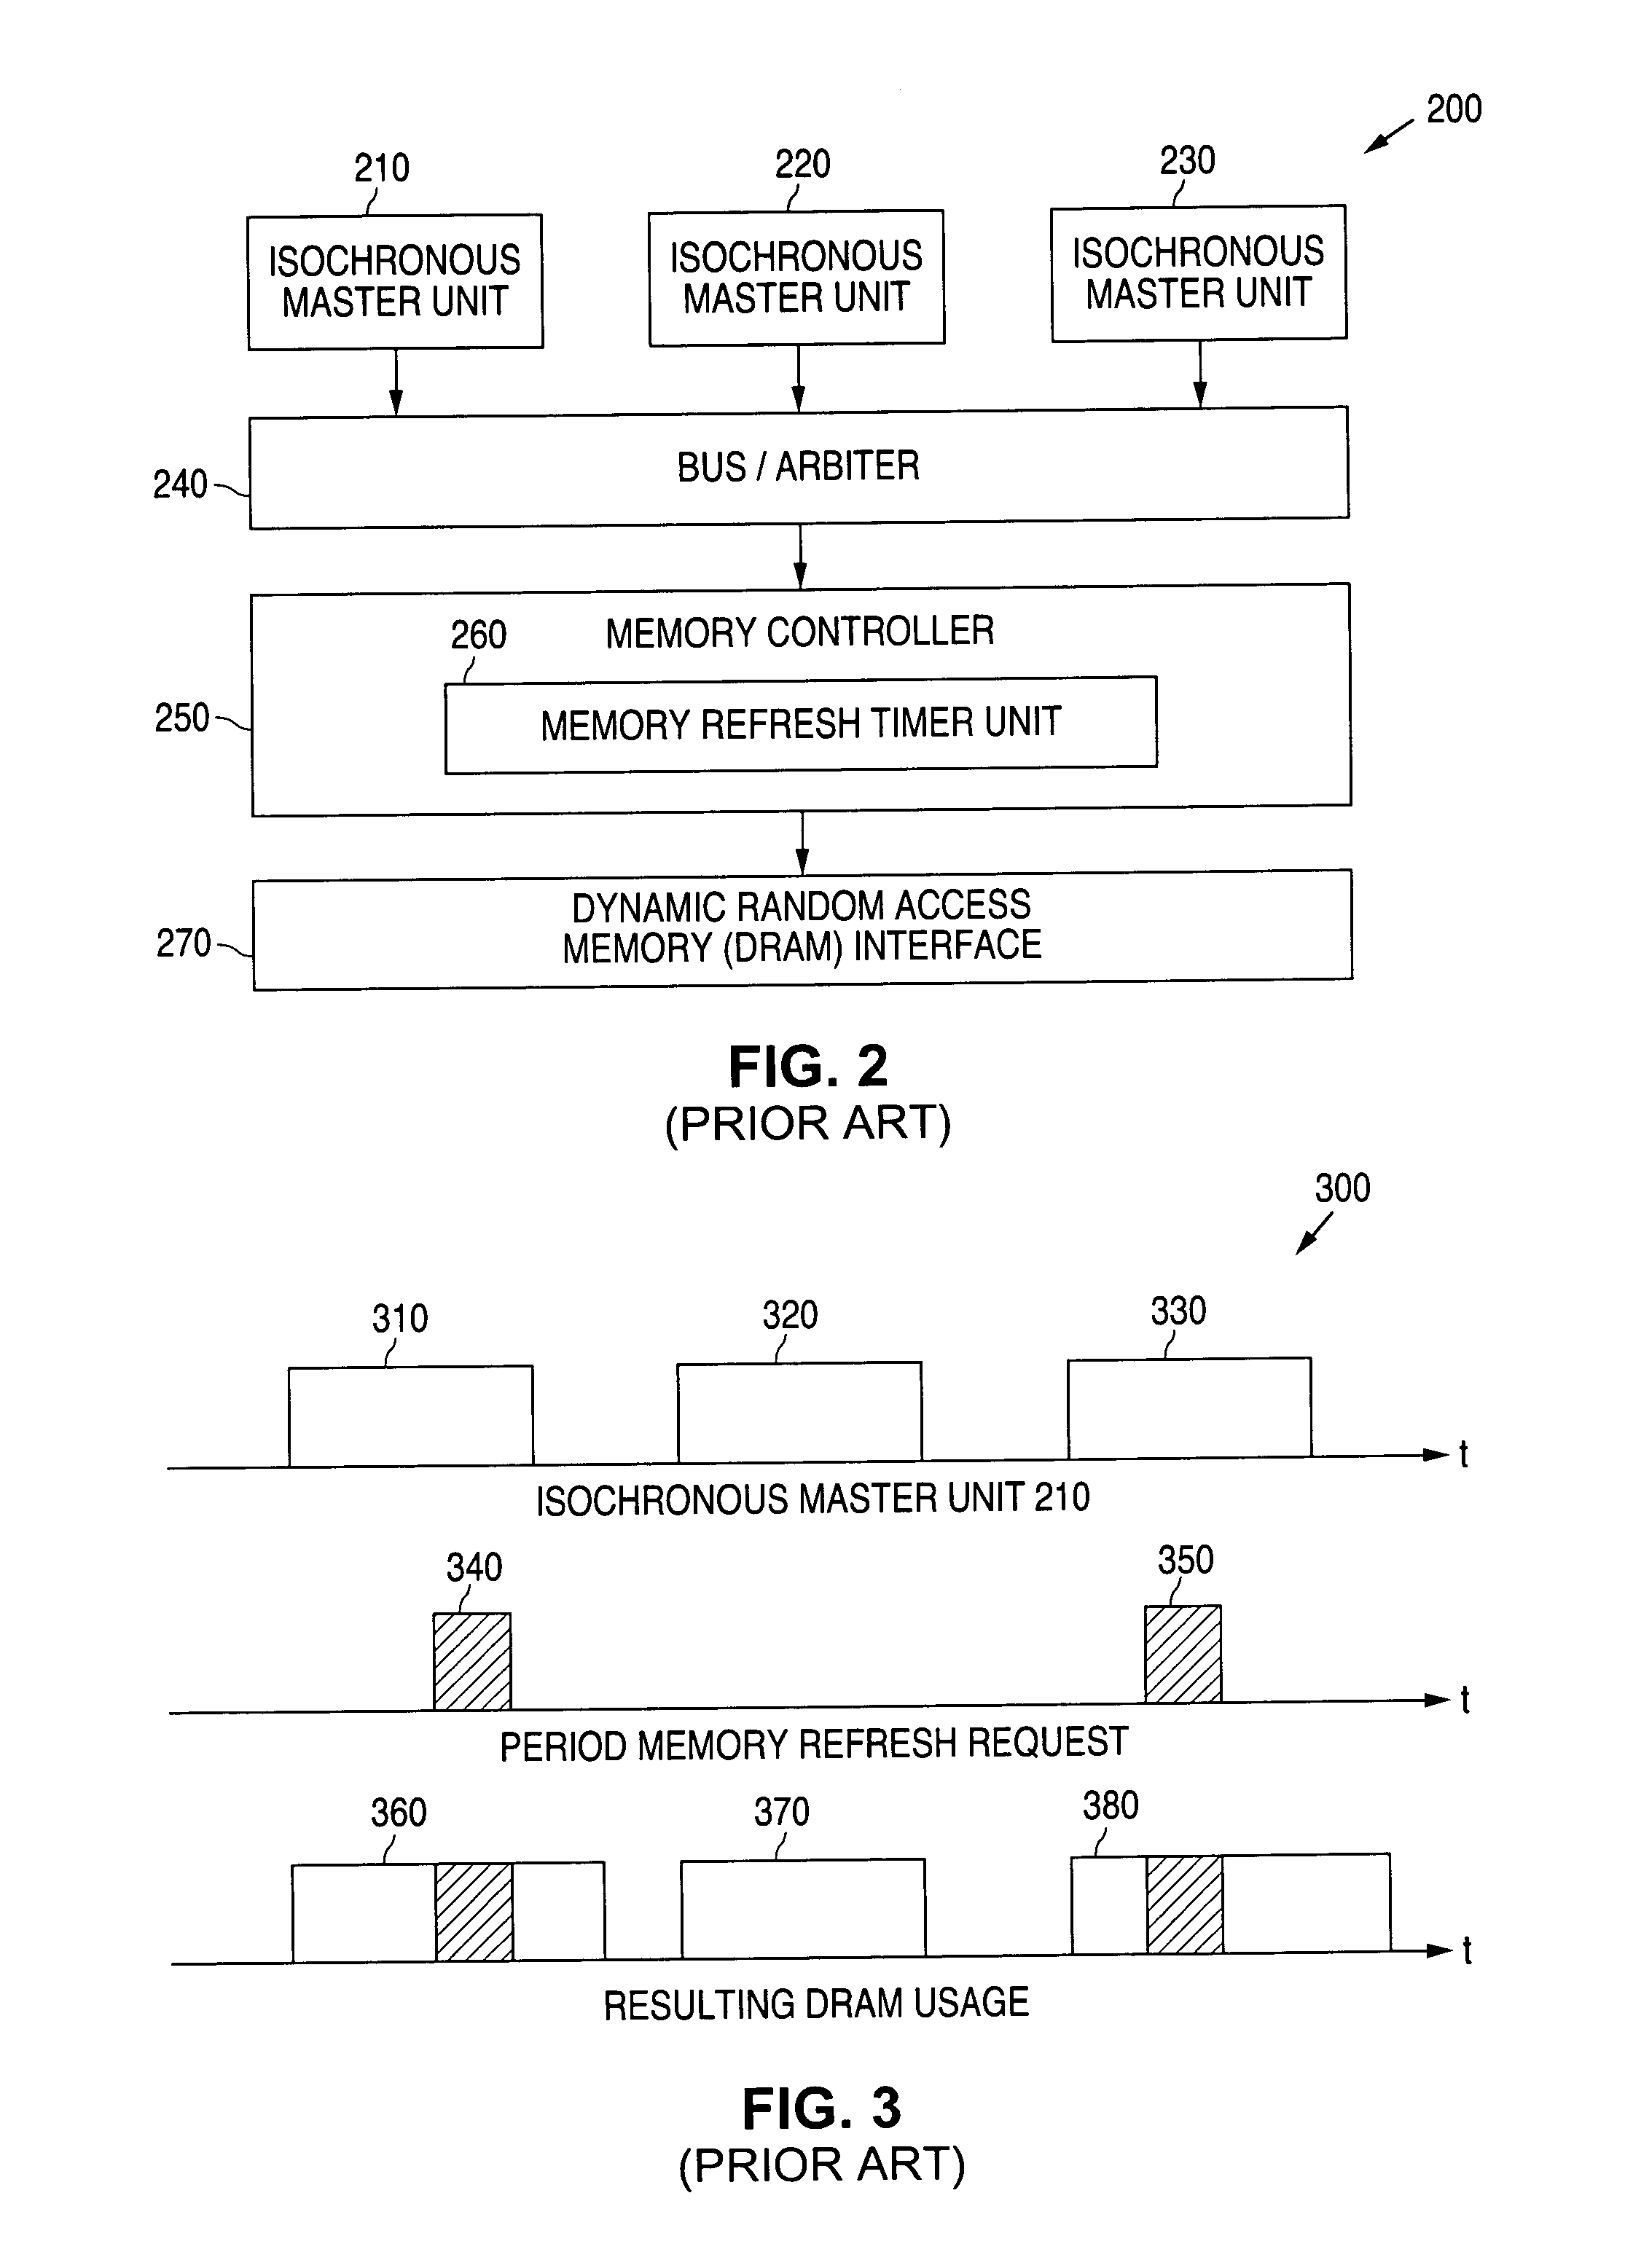 Apparatus and method for isochronous arbitration to schedule memory refresh requests